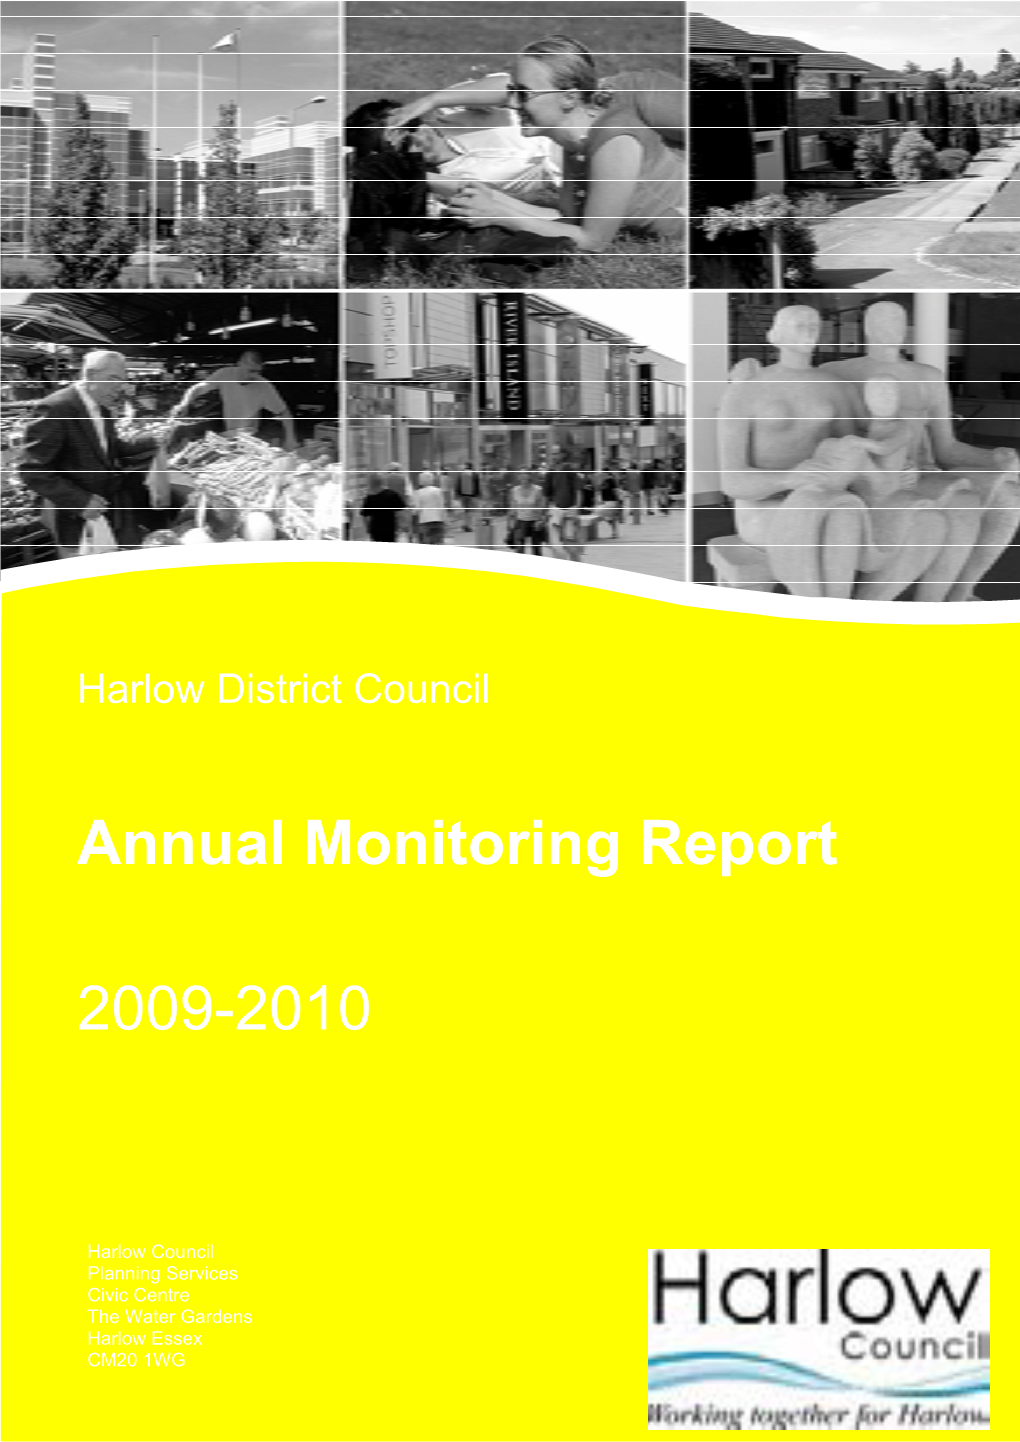 Annual Monitoring Report 2009-2010